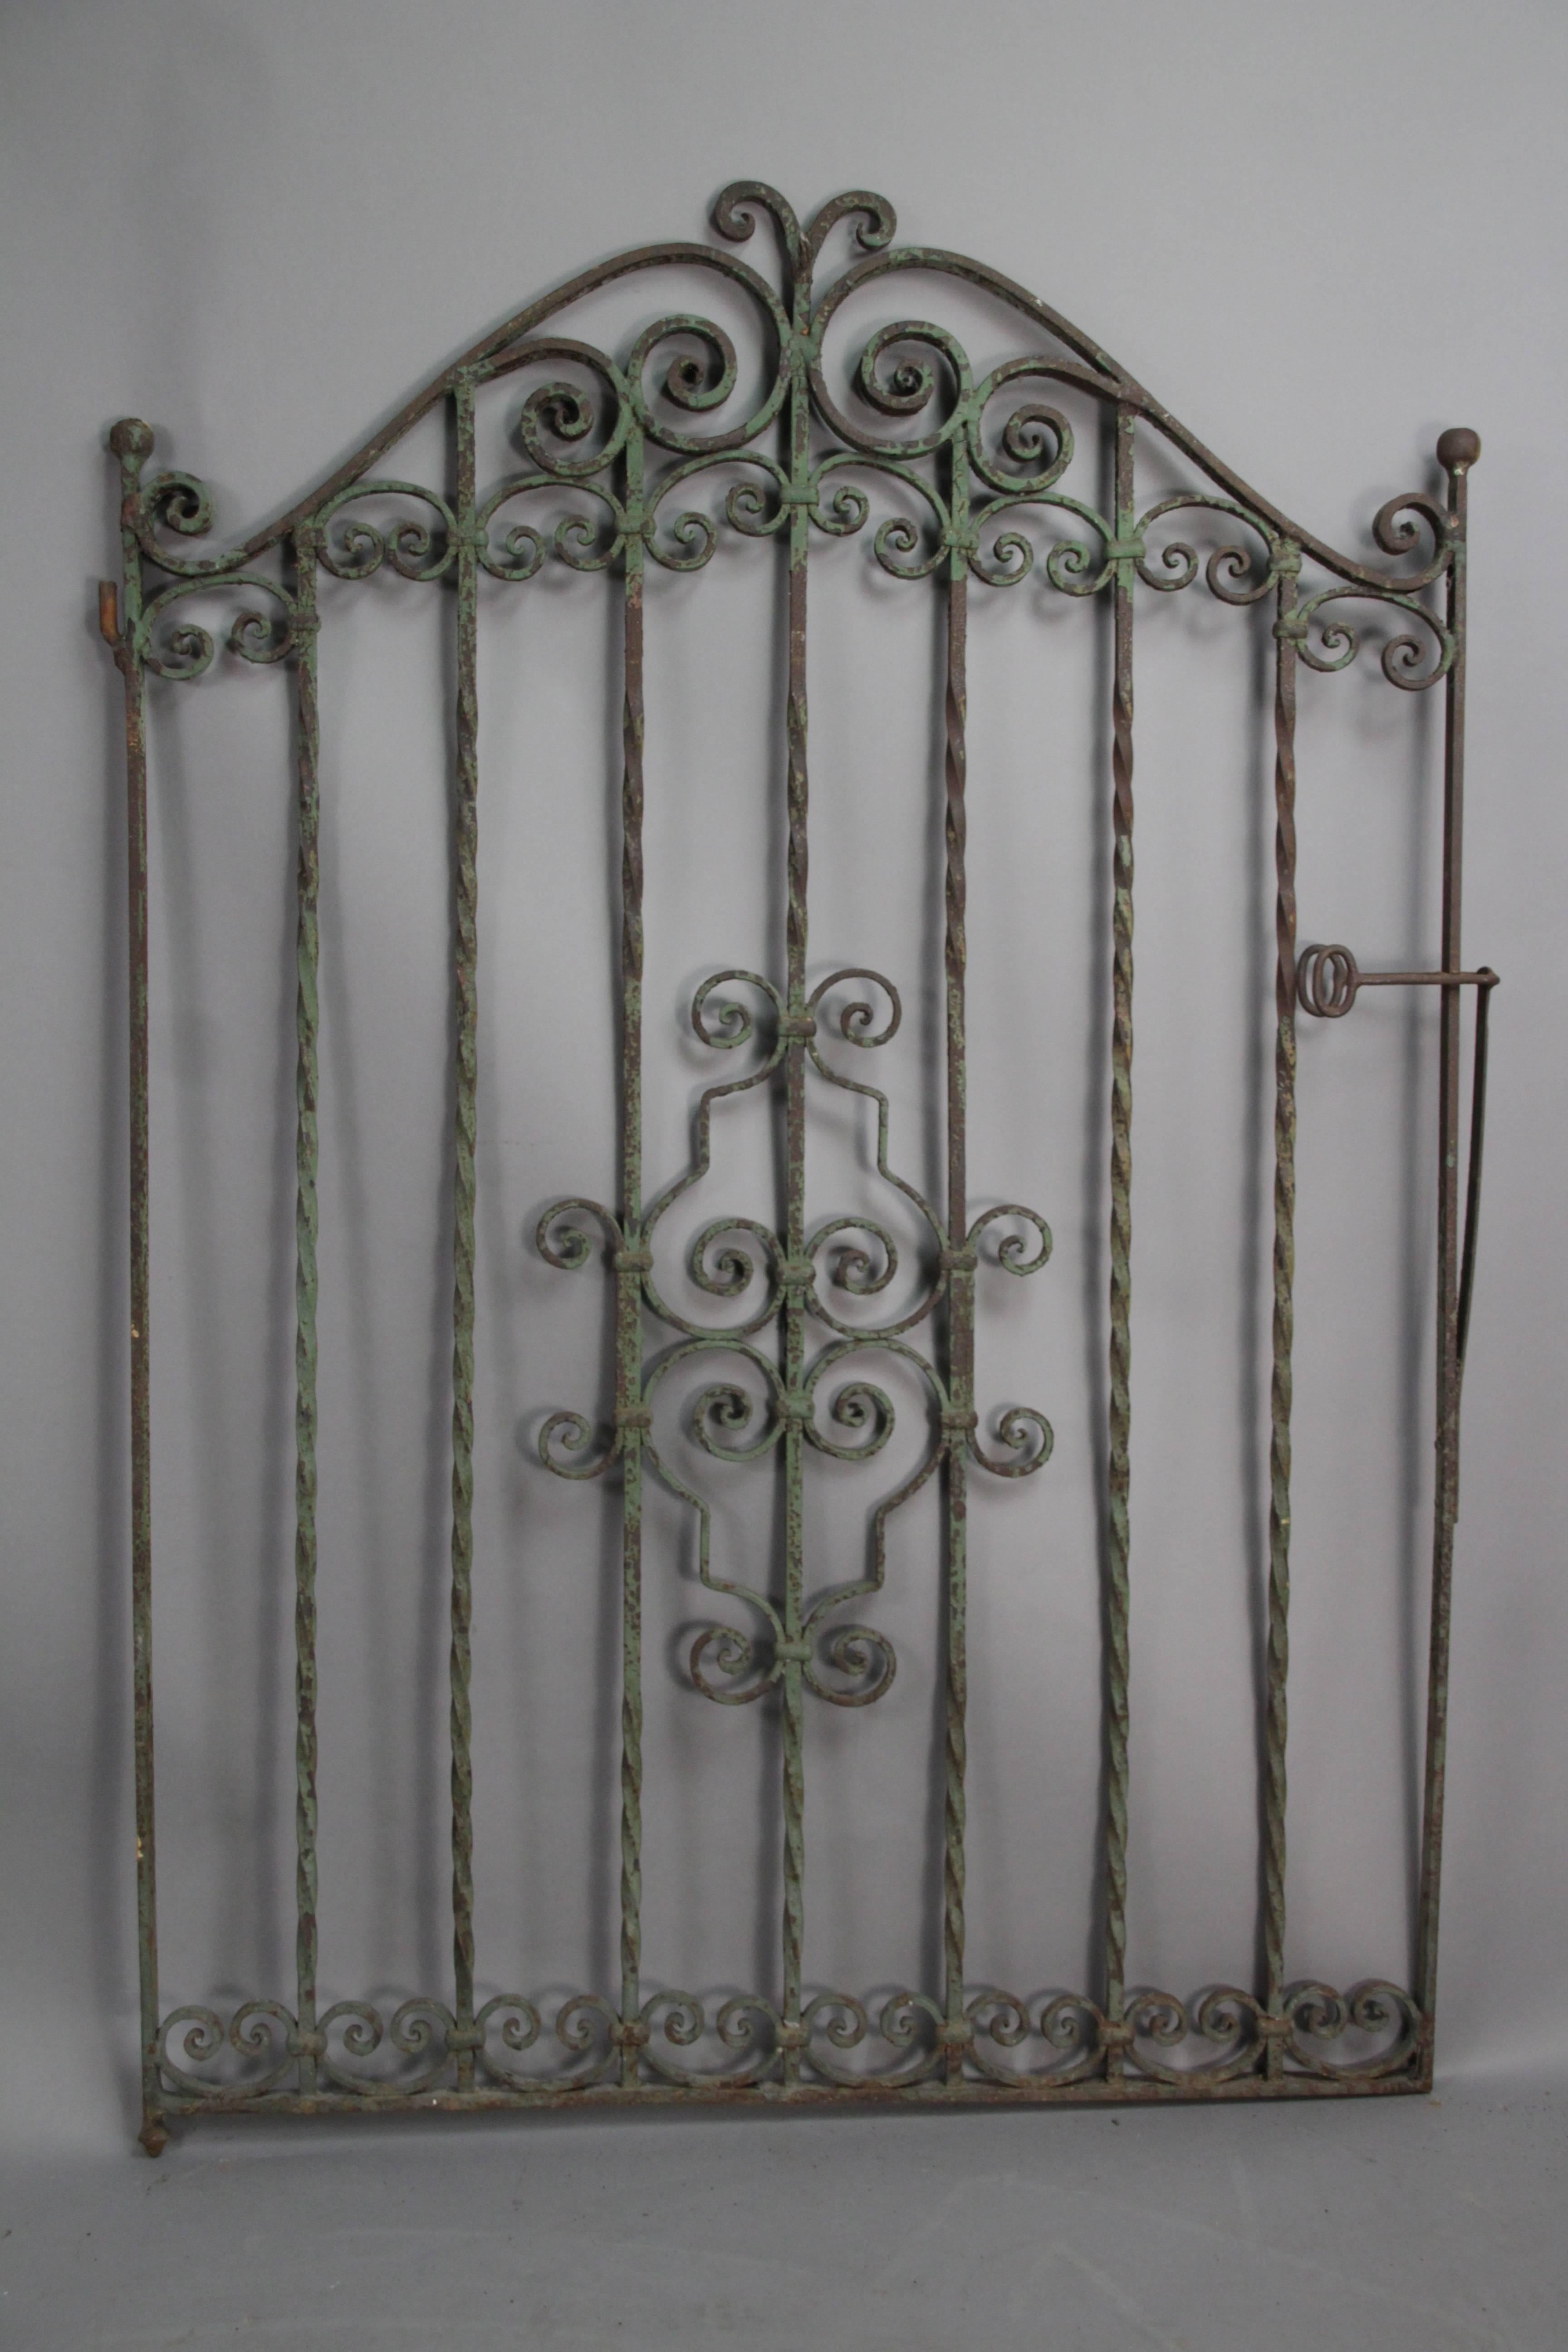 Garden gate with great old patina, circa 1920s. Wrought iron construction. Salvaged from local Los Angeles estate.